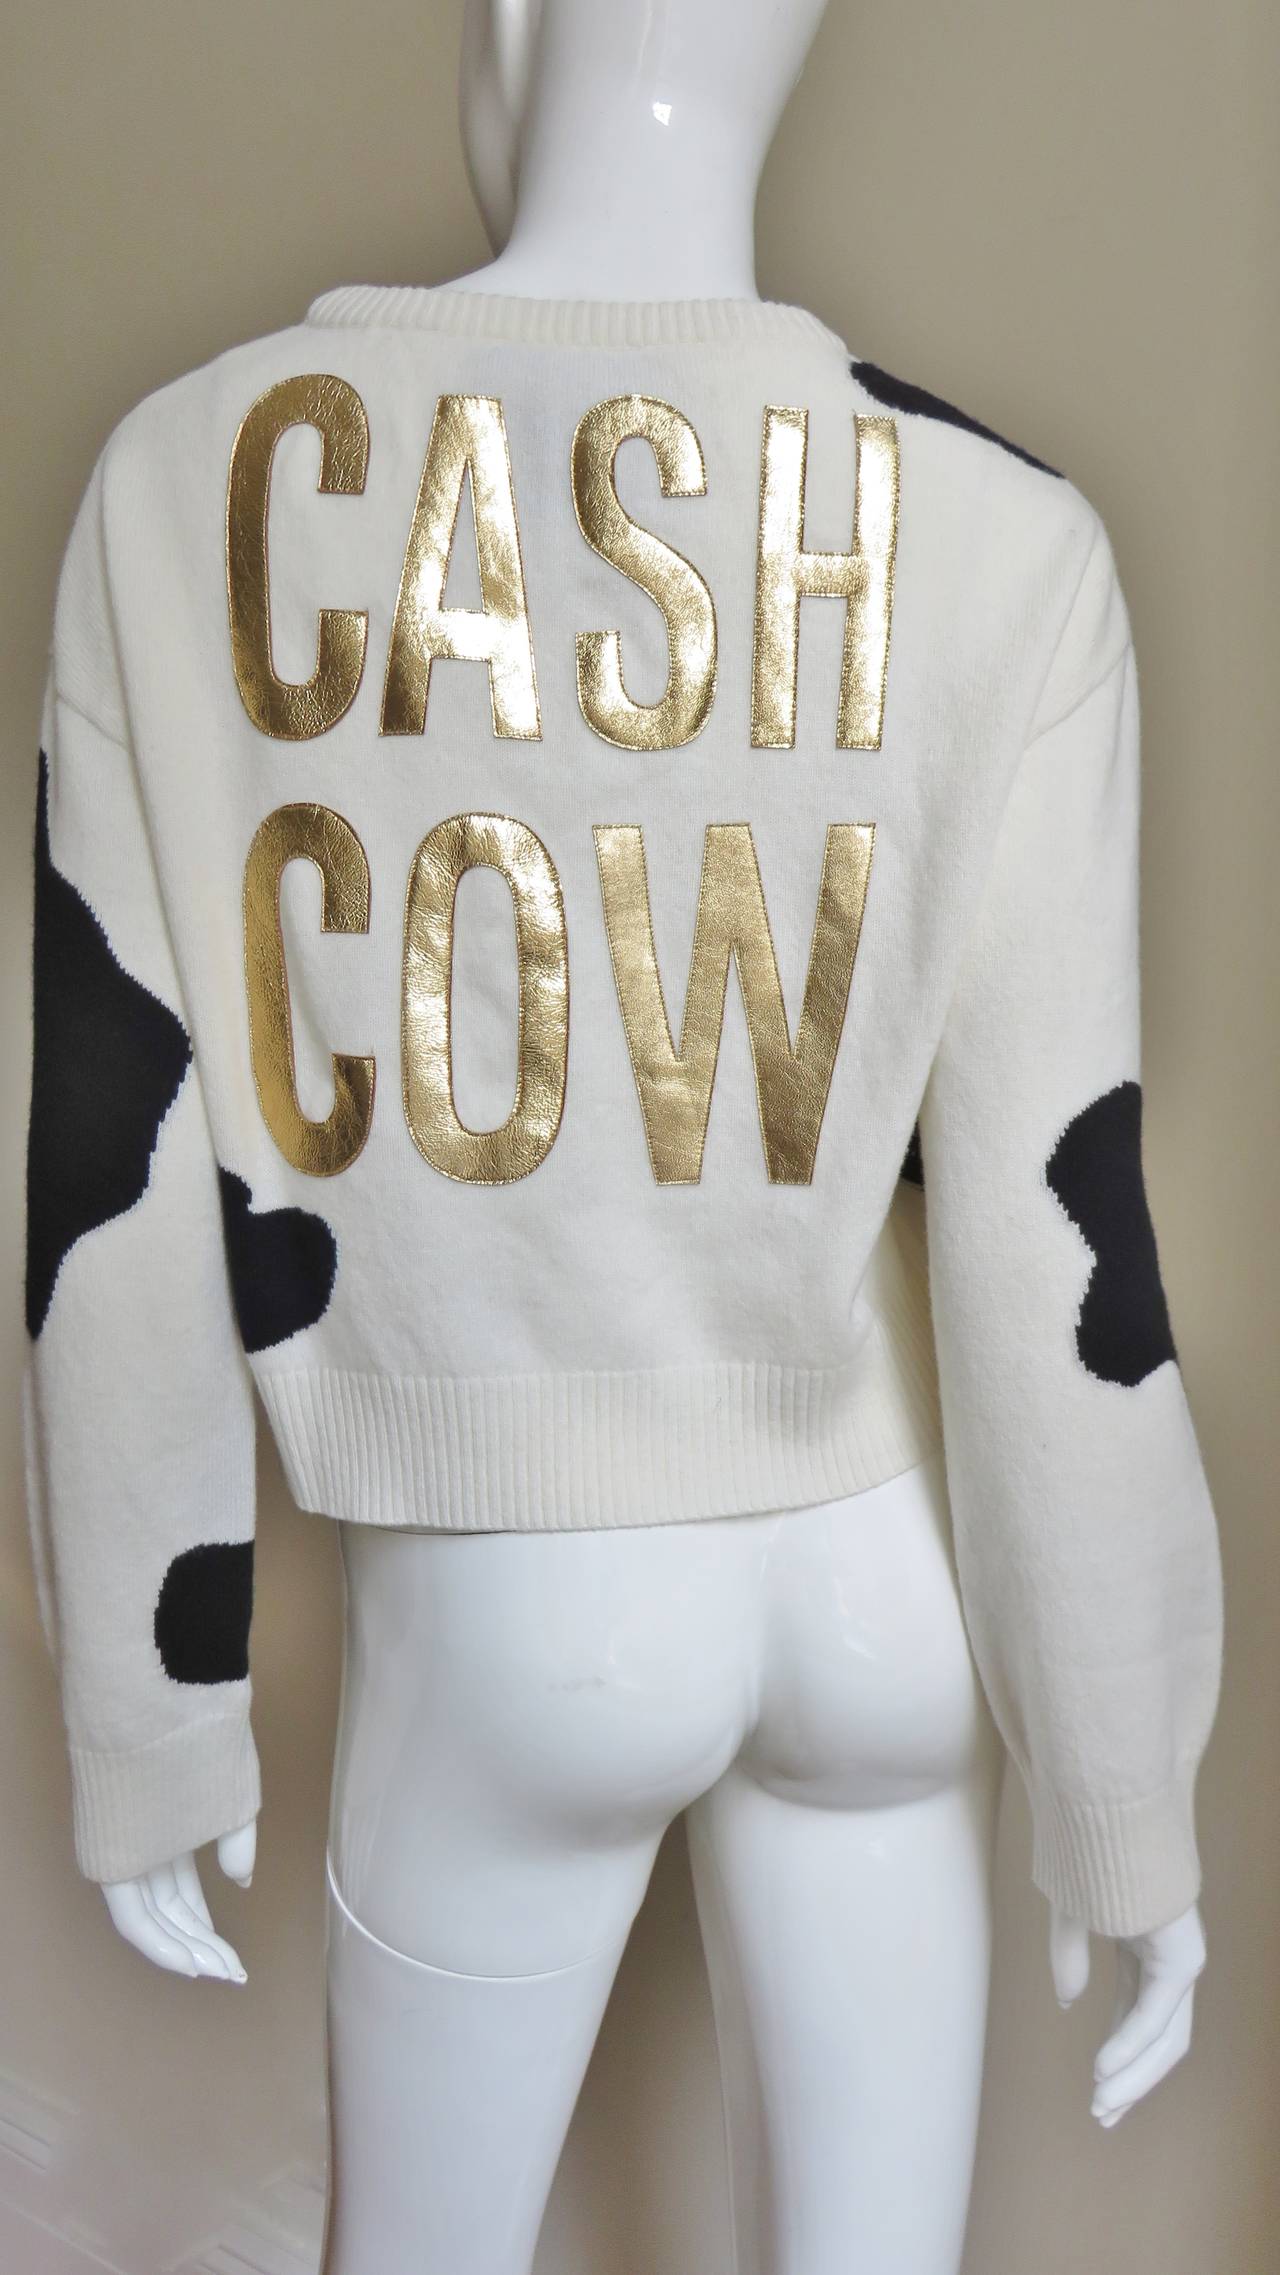 A fabulous long sleeve, crew neck cashmere sweater from Moschino Couture with 'CASH COW' emblazoned in gold letters individually sewn onto the back of the cow fur pattern in black on off white.  Slips on over the head.
Fits sizes Medium, Large. 